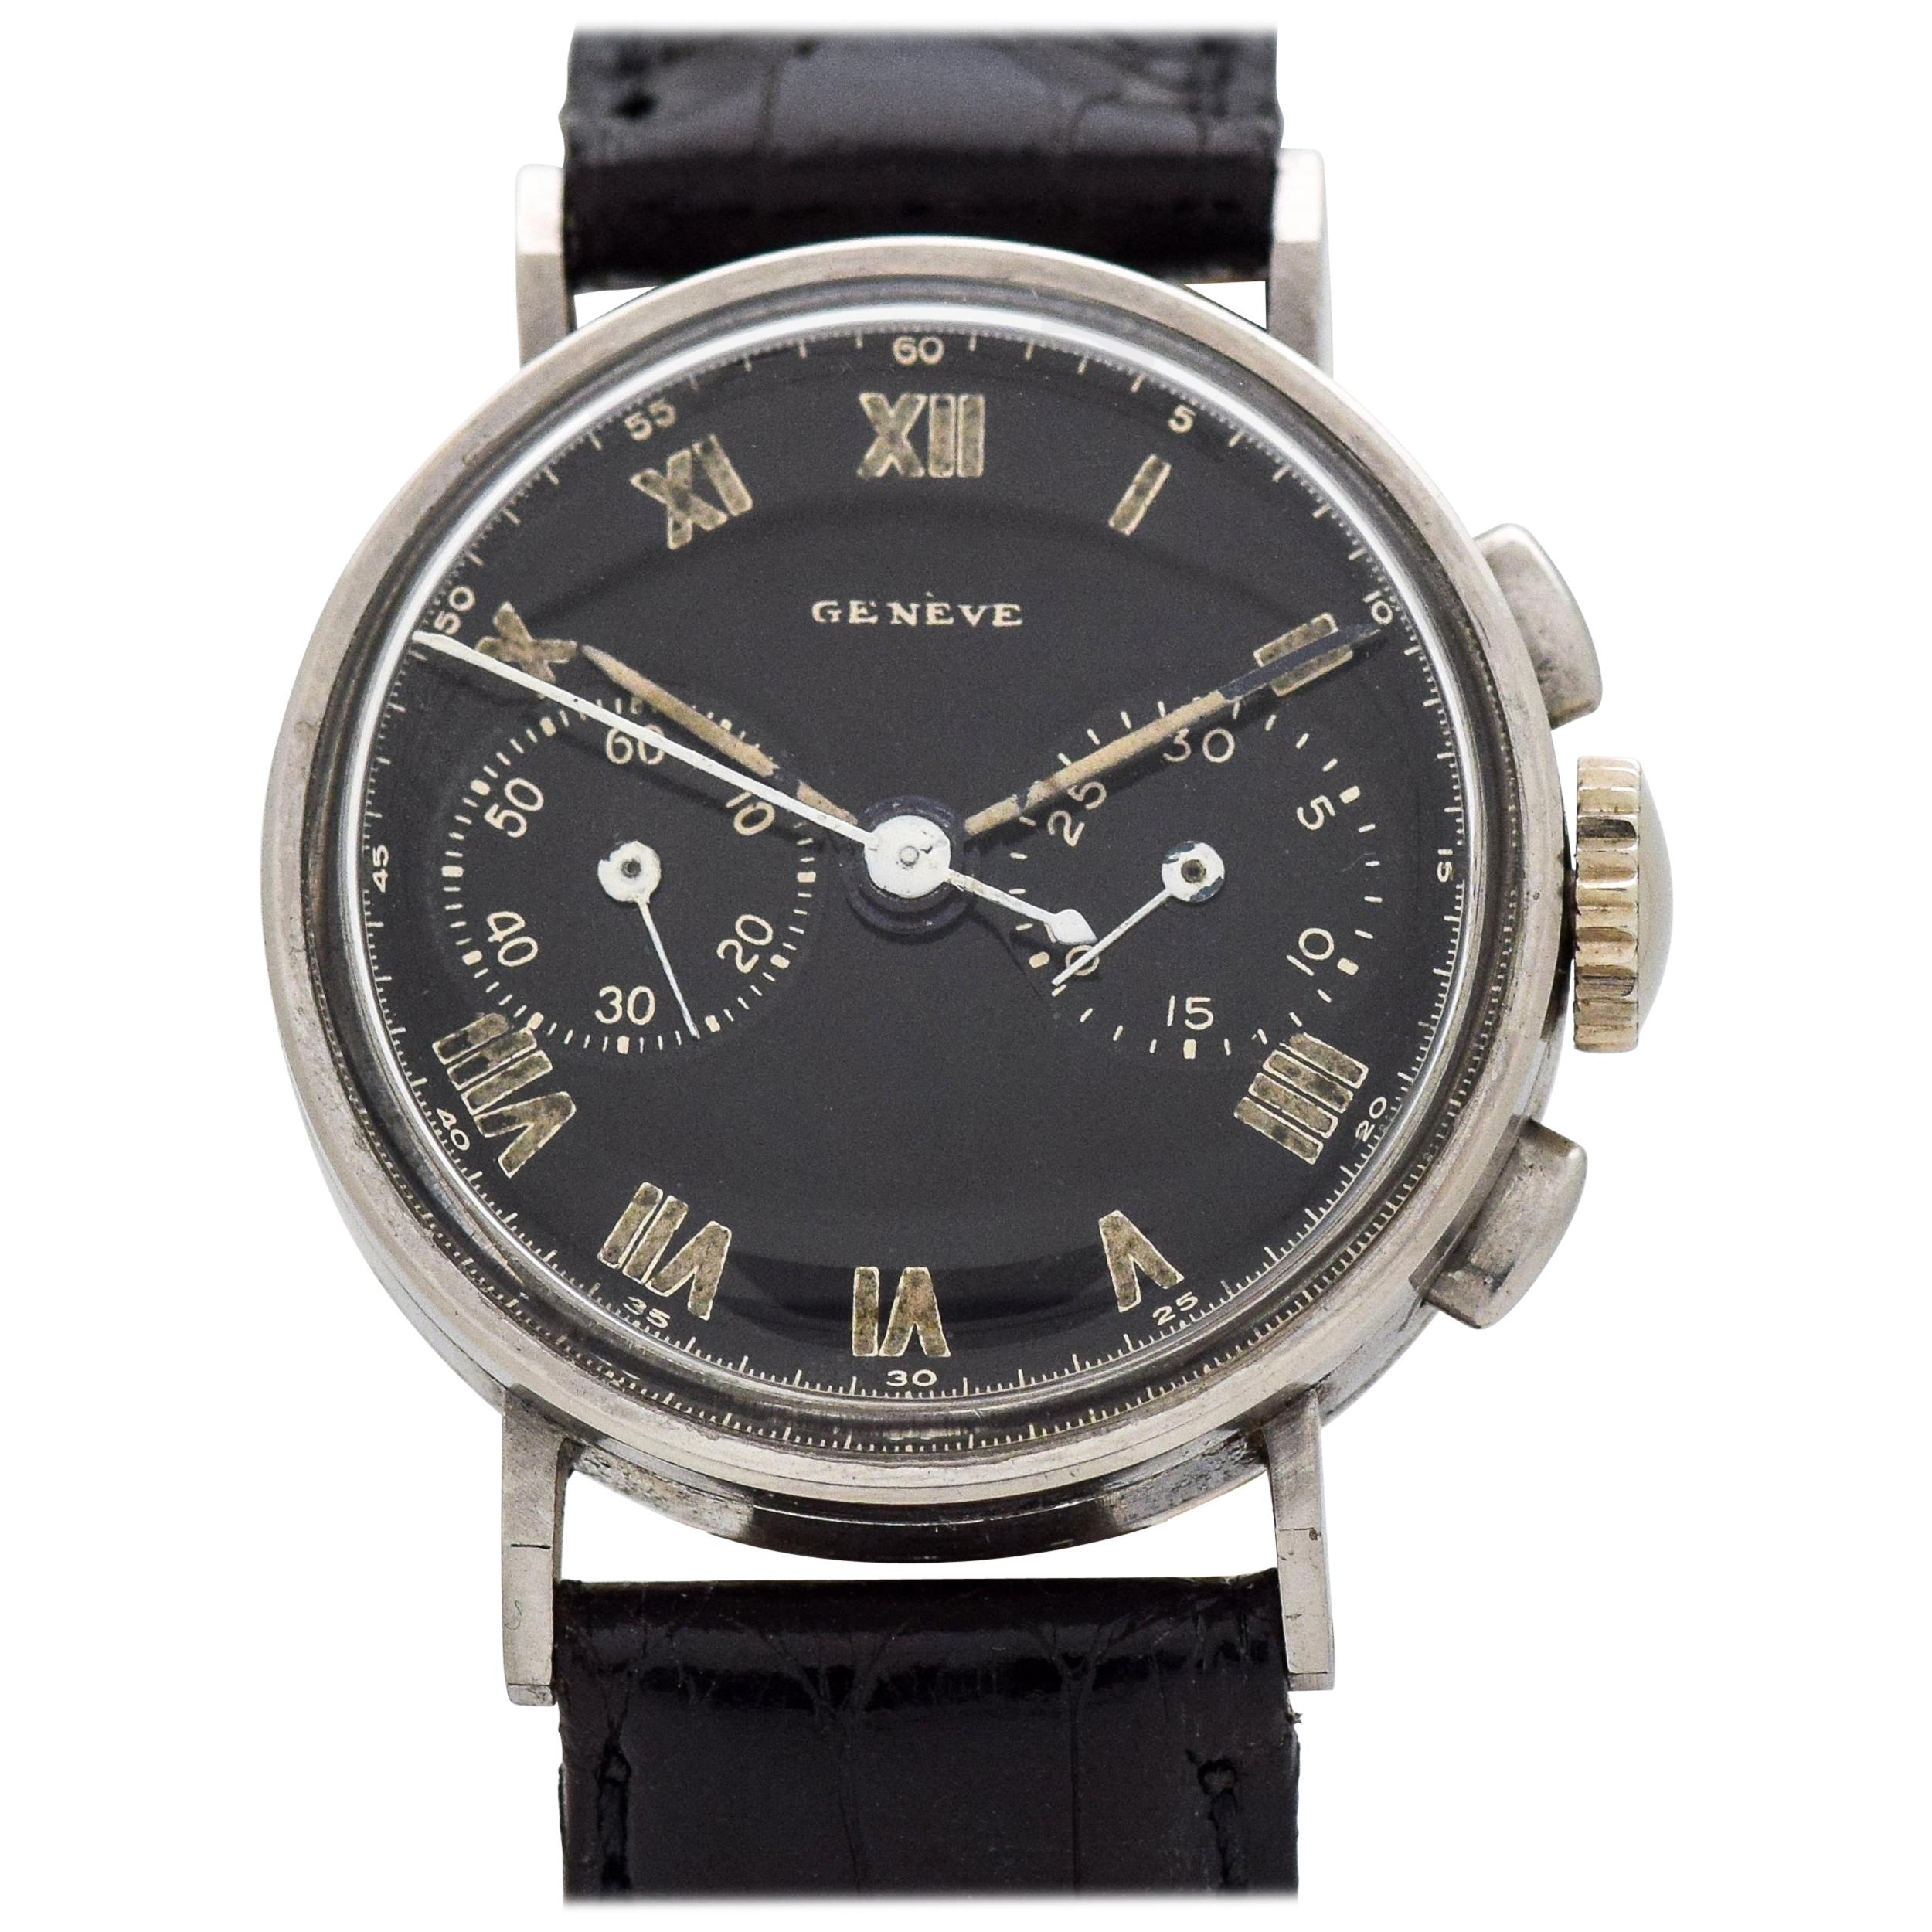 Vintage Heuer Midsize 2-Register Chronograph in Stainless Steel, 1950s For Sale